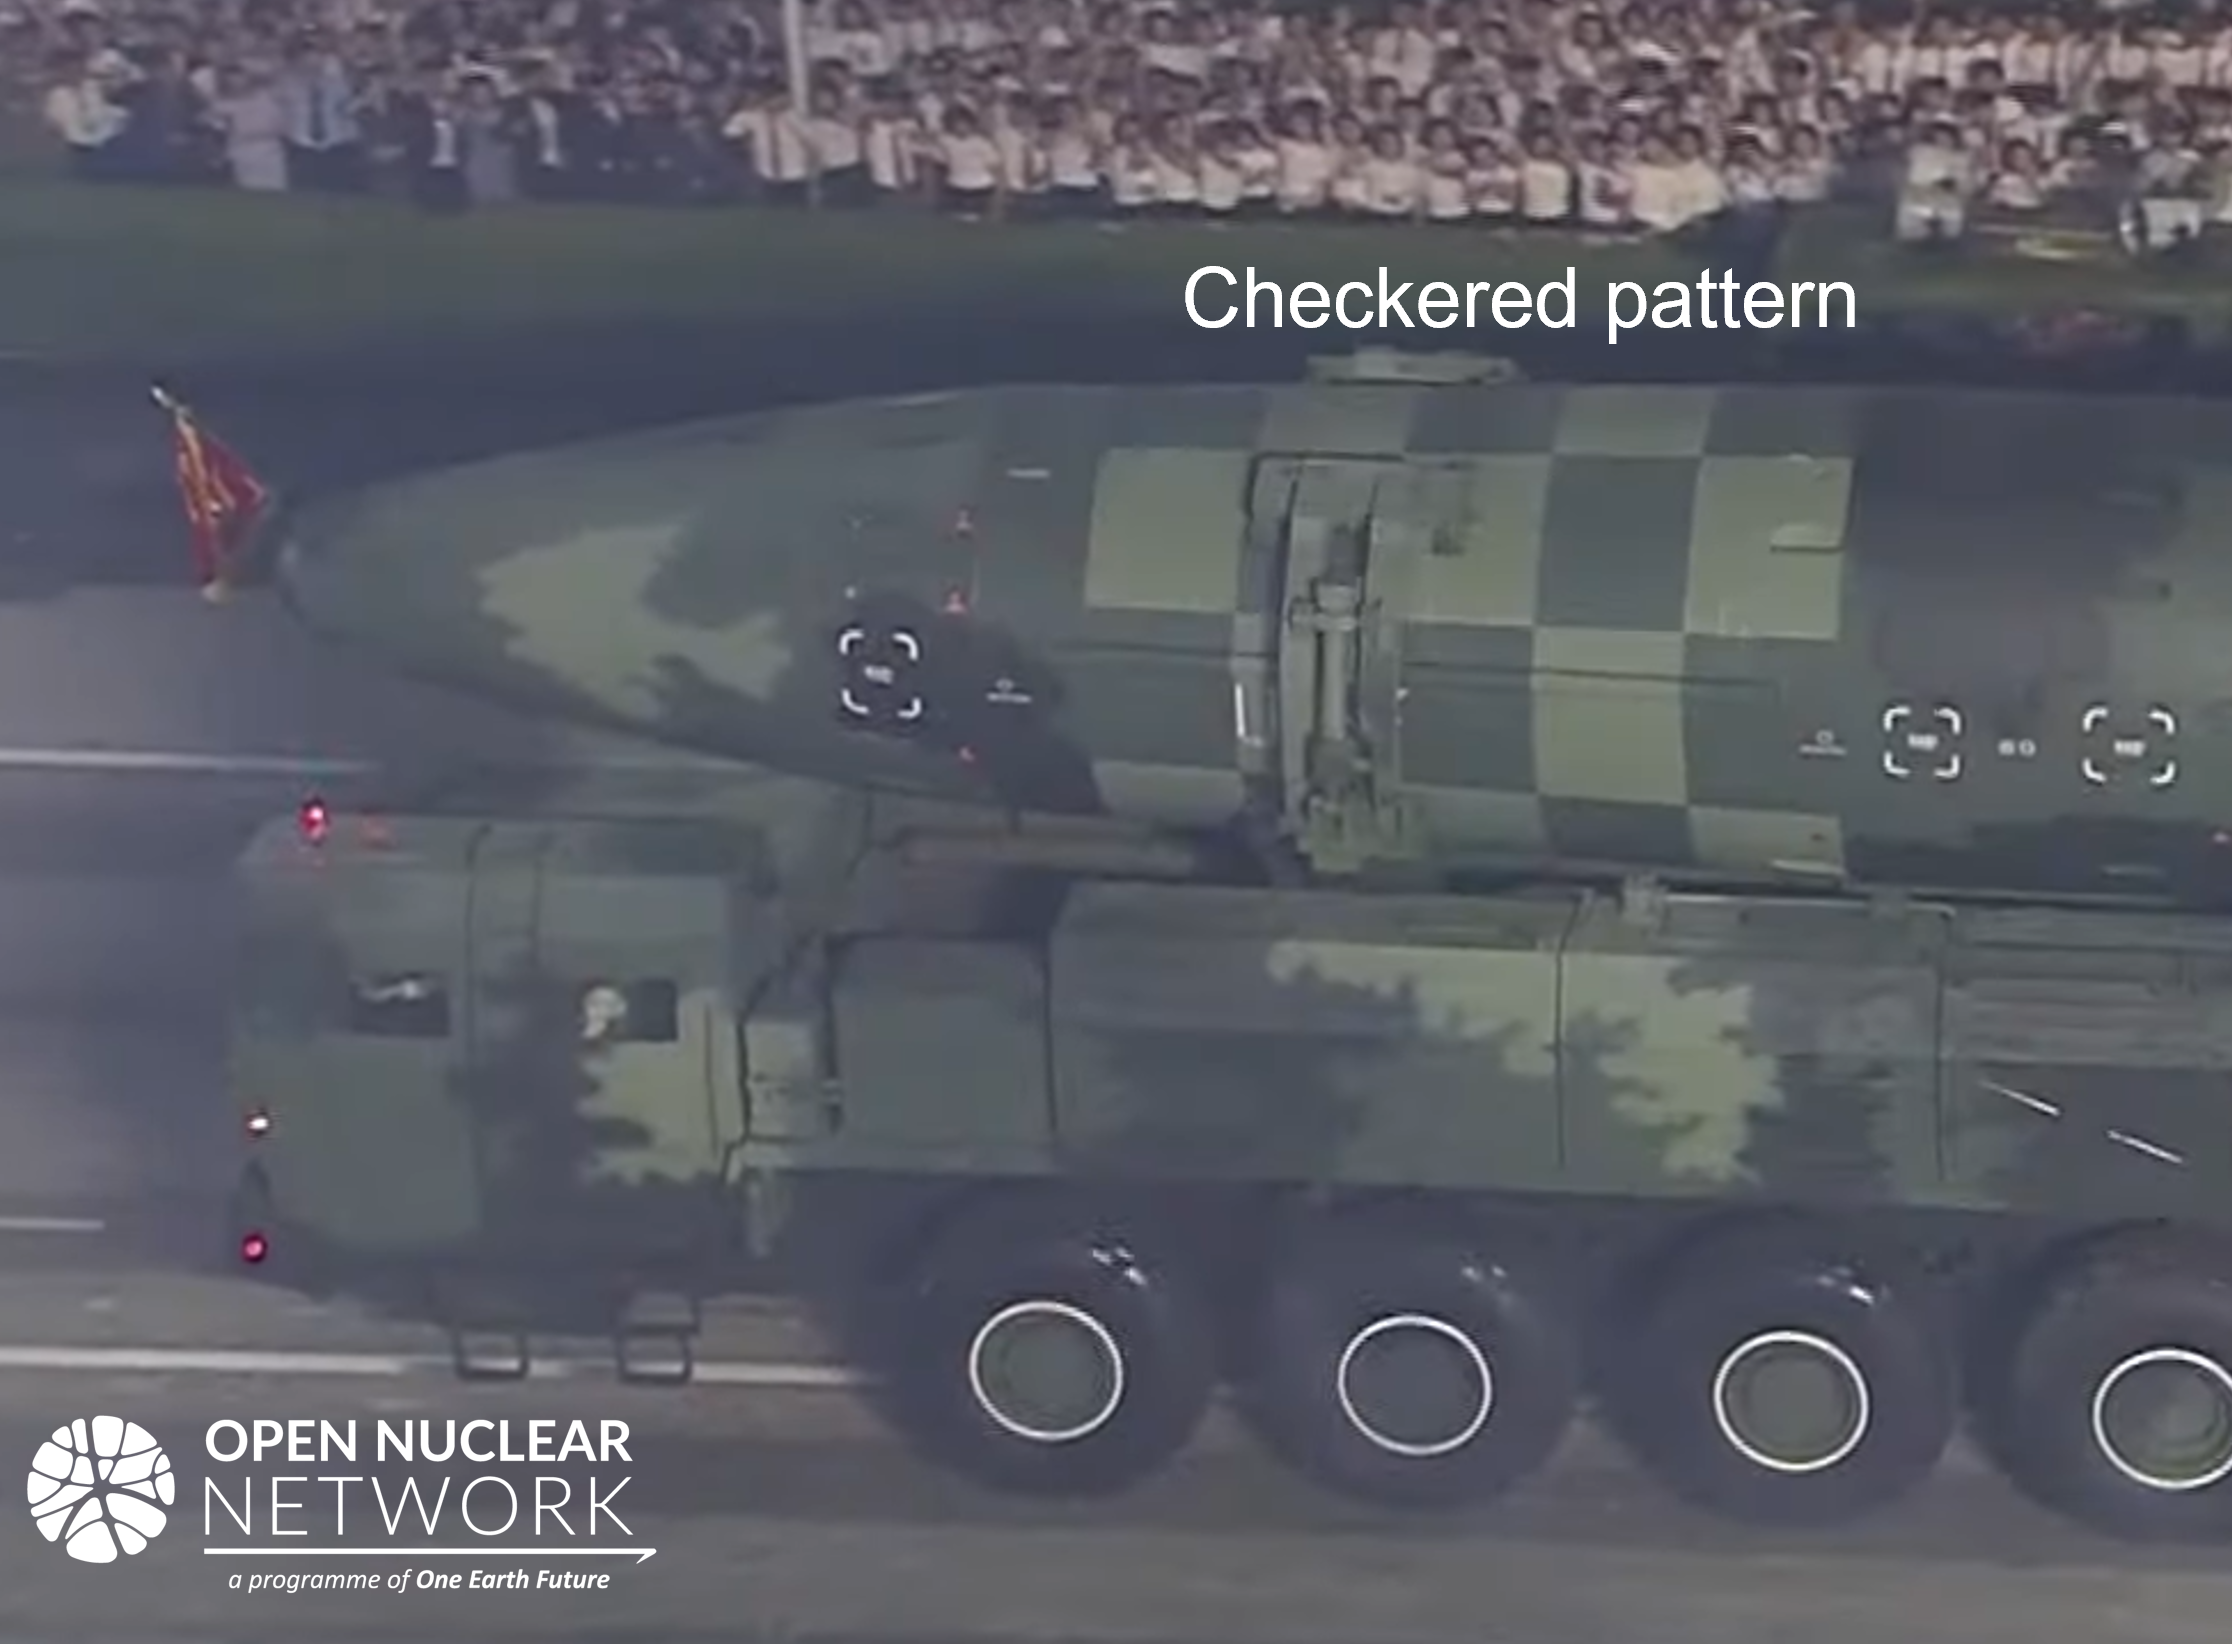 Figure 5. The Hwasong-17’s checkered pattern is visible despite the new camouflage overpaint. Images: KCTV/Yonhap